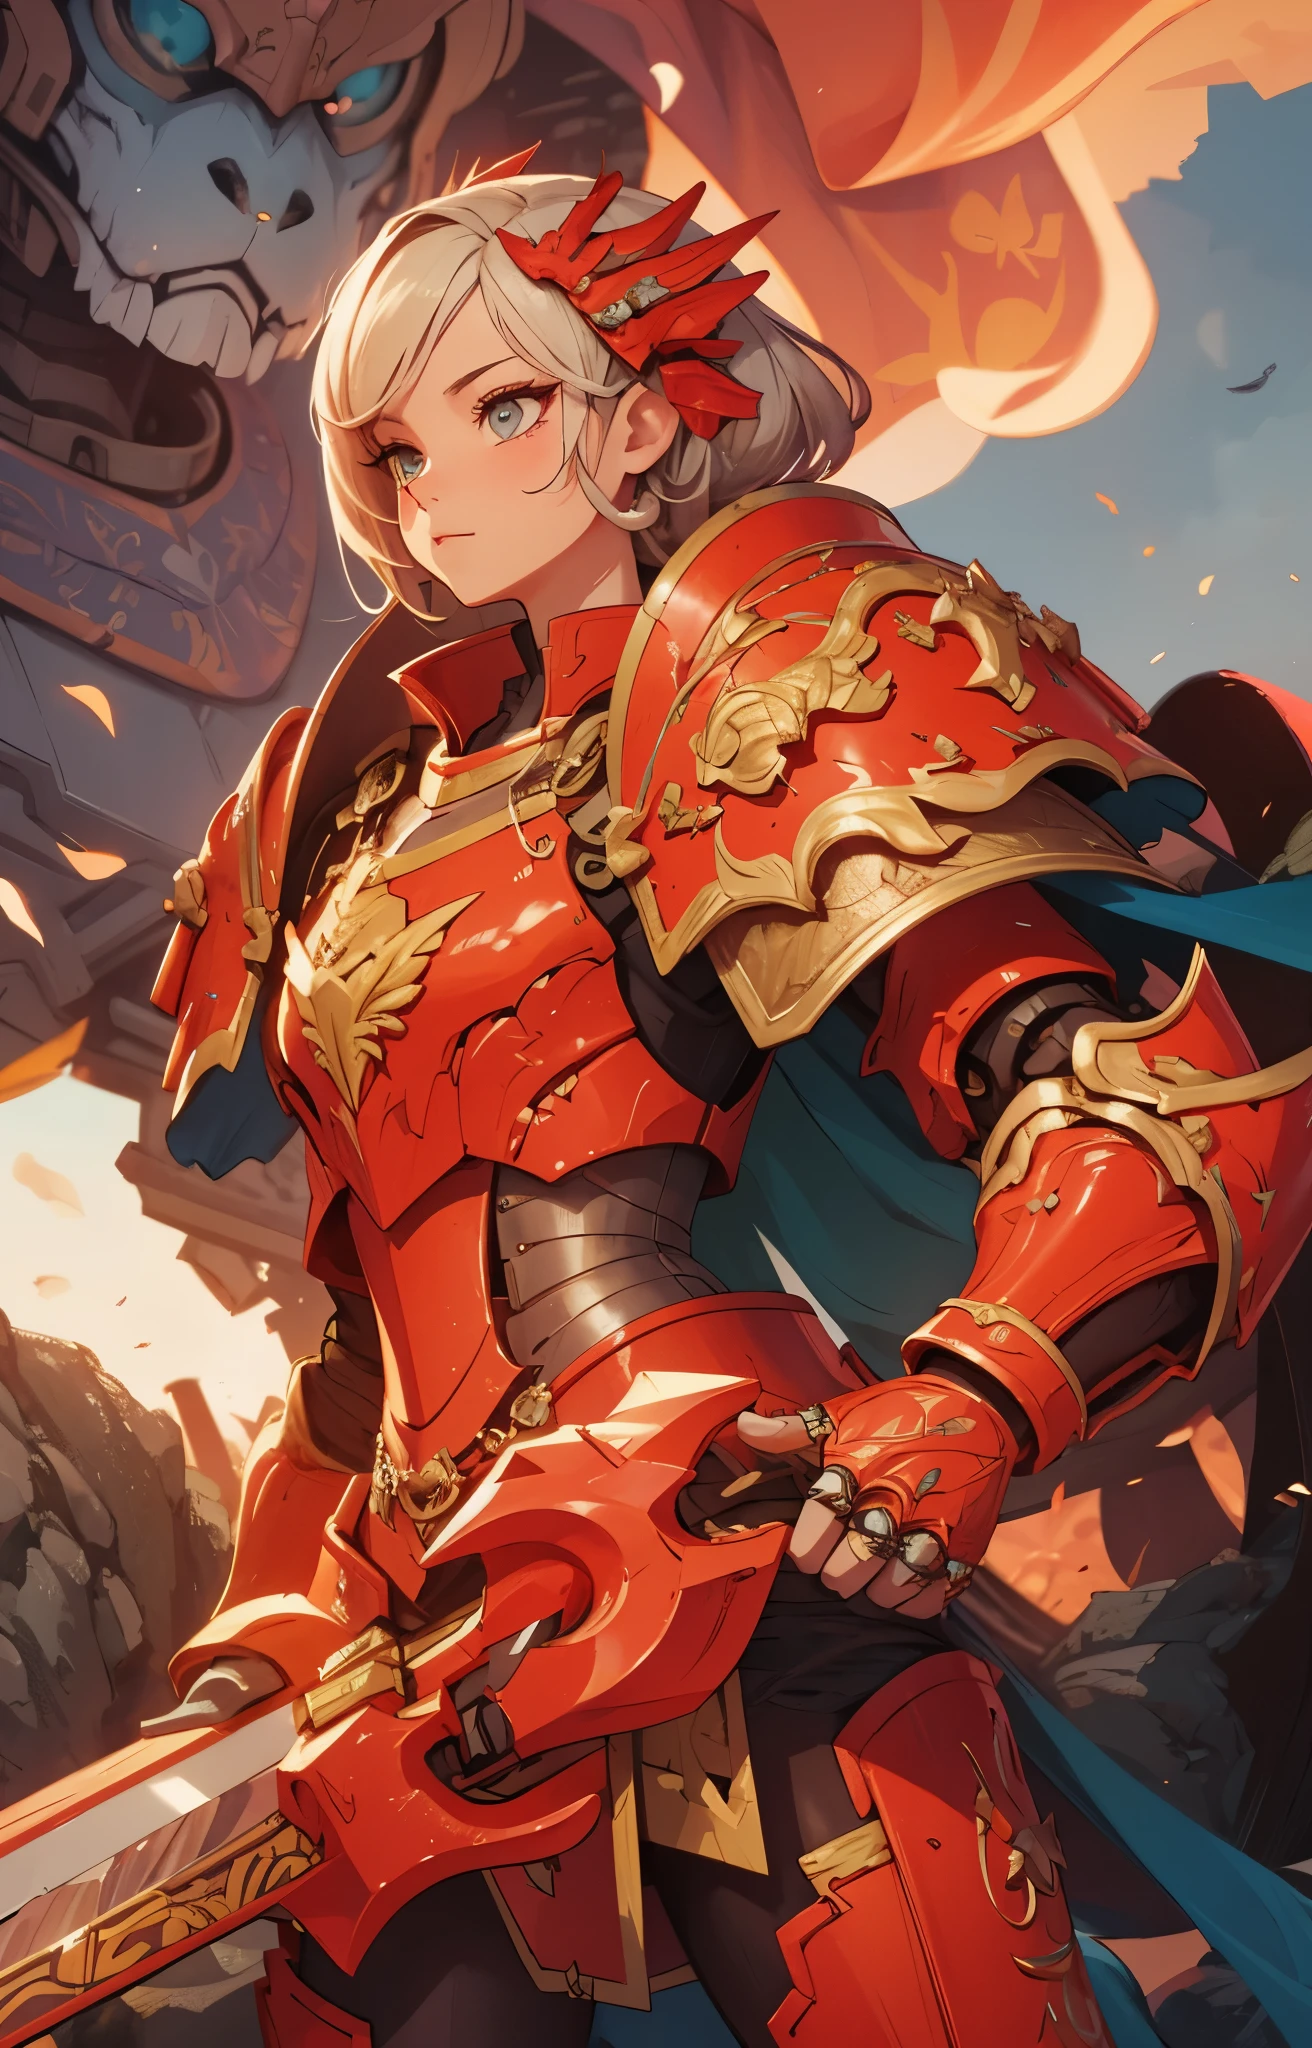 (detailed illustrations,Very detailed and precise drawing,Delicate drawn lines with tempo,Realistic texture expression),[color traced main line],(Fantasy World Battlefield Background [burning castle]),((ROBOT GIRL)(red knight[muscular][[METALFACE[clear lenticular iris]]])[WEAPON MACHINE[Princess Knight]]),[[corinthian helmet]][red dragon armor[scale][embroidered cloak]],[Crimson dragon pattern],[use a sword as a weapon],[[Mobile Weapon Gigant Size][science fiction mechanical]],((Gorgeous metallic red armor)),(intricate and beautiful decoration [Dense detail]),[transparency],(Precisely drawn face)[Perfect eyes detailed(Beautifully detailed iris)[eyes like jewels]],[long and beautiful eyelashes],[precisely drawn hair [Beautiful and lustrous hair detailed]],(Perfectly hand detailed [Beautiful fingers with no damage [beautiful nails]]),(perfect anatomy(perfectly balanced proportions))[[full body portrait]],[ideal color coordination(Accurate simulation of light and material interactions)],([Precision Detail](detailed,High definition)),[Visual art that tells a story].